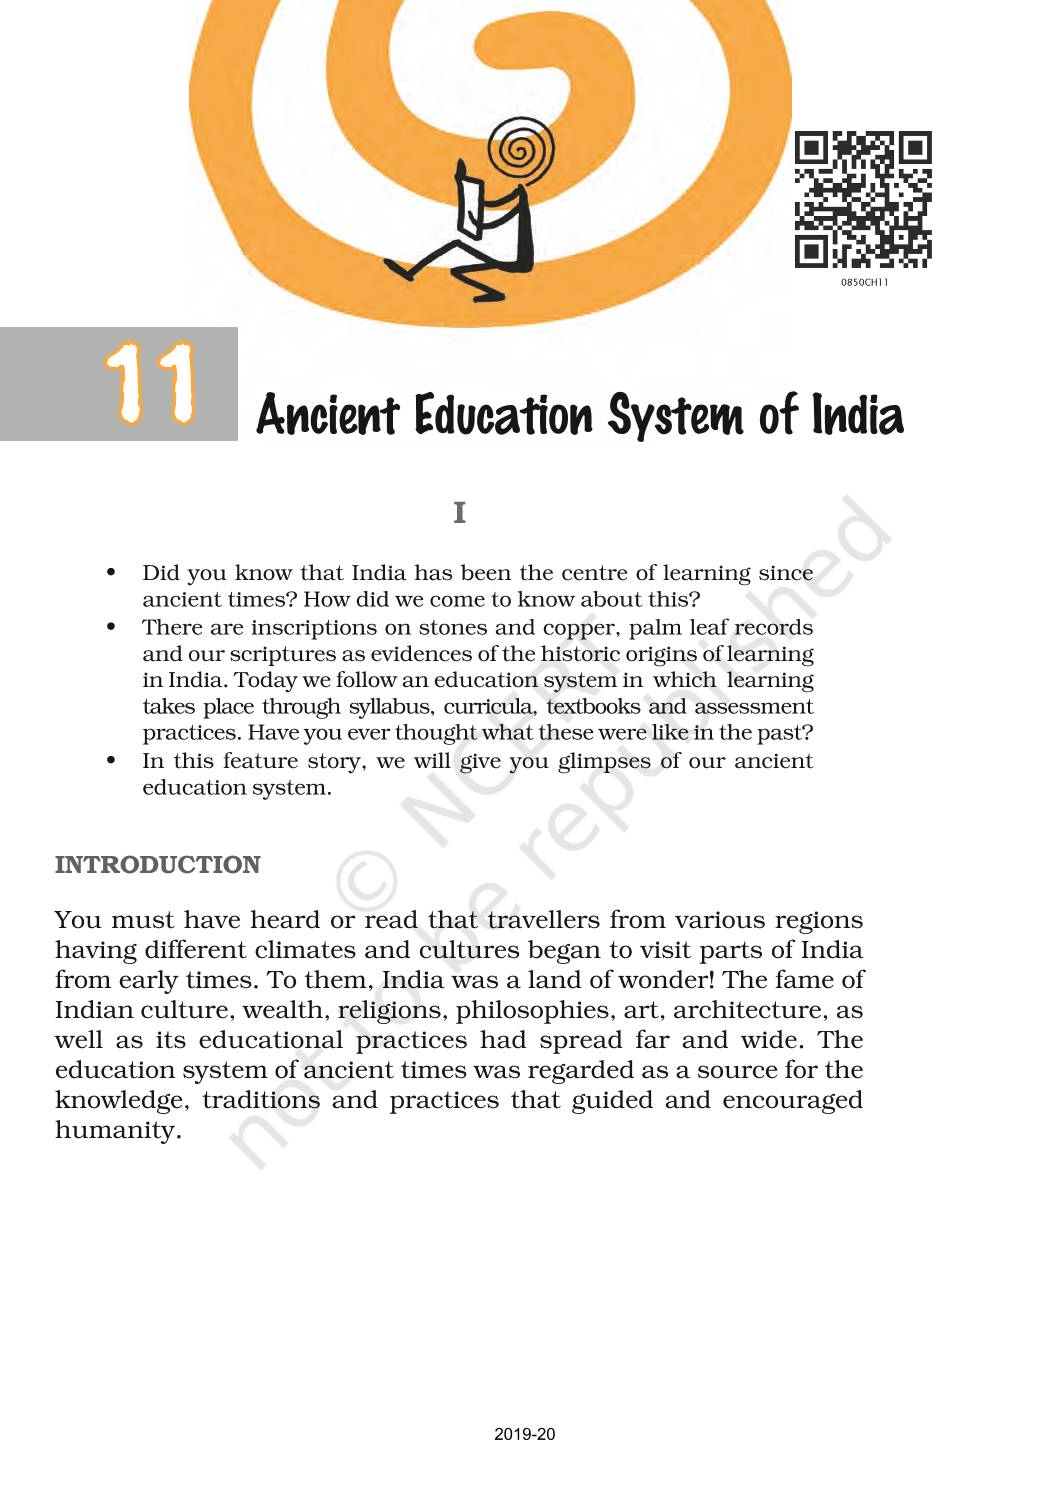 essay on ancient indian education system